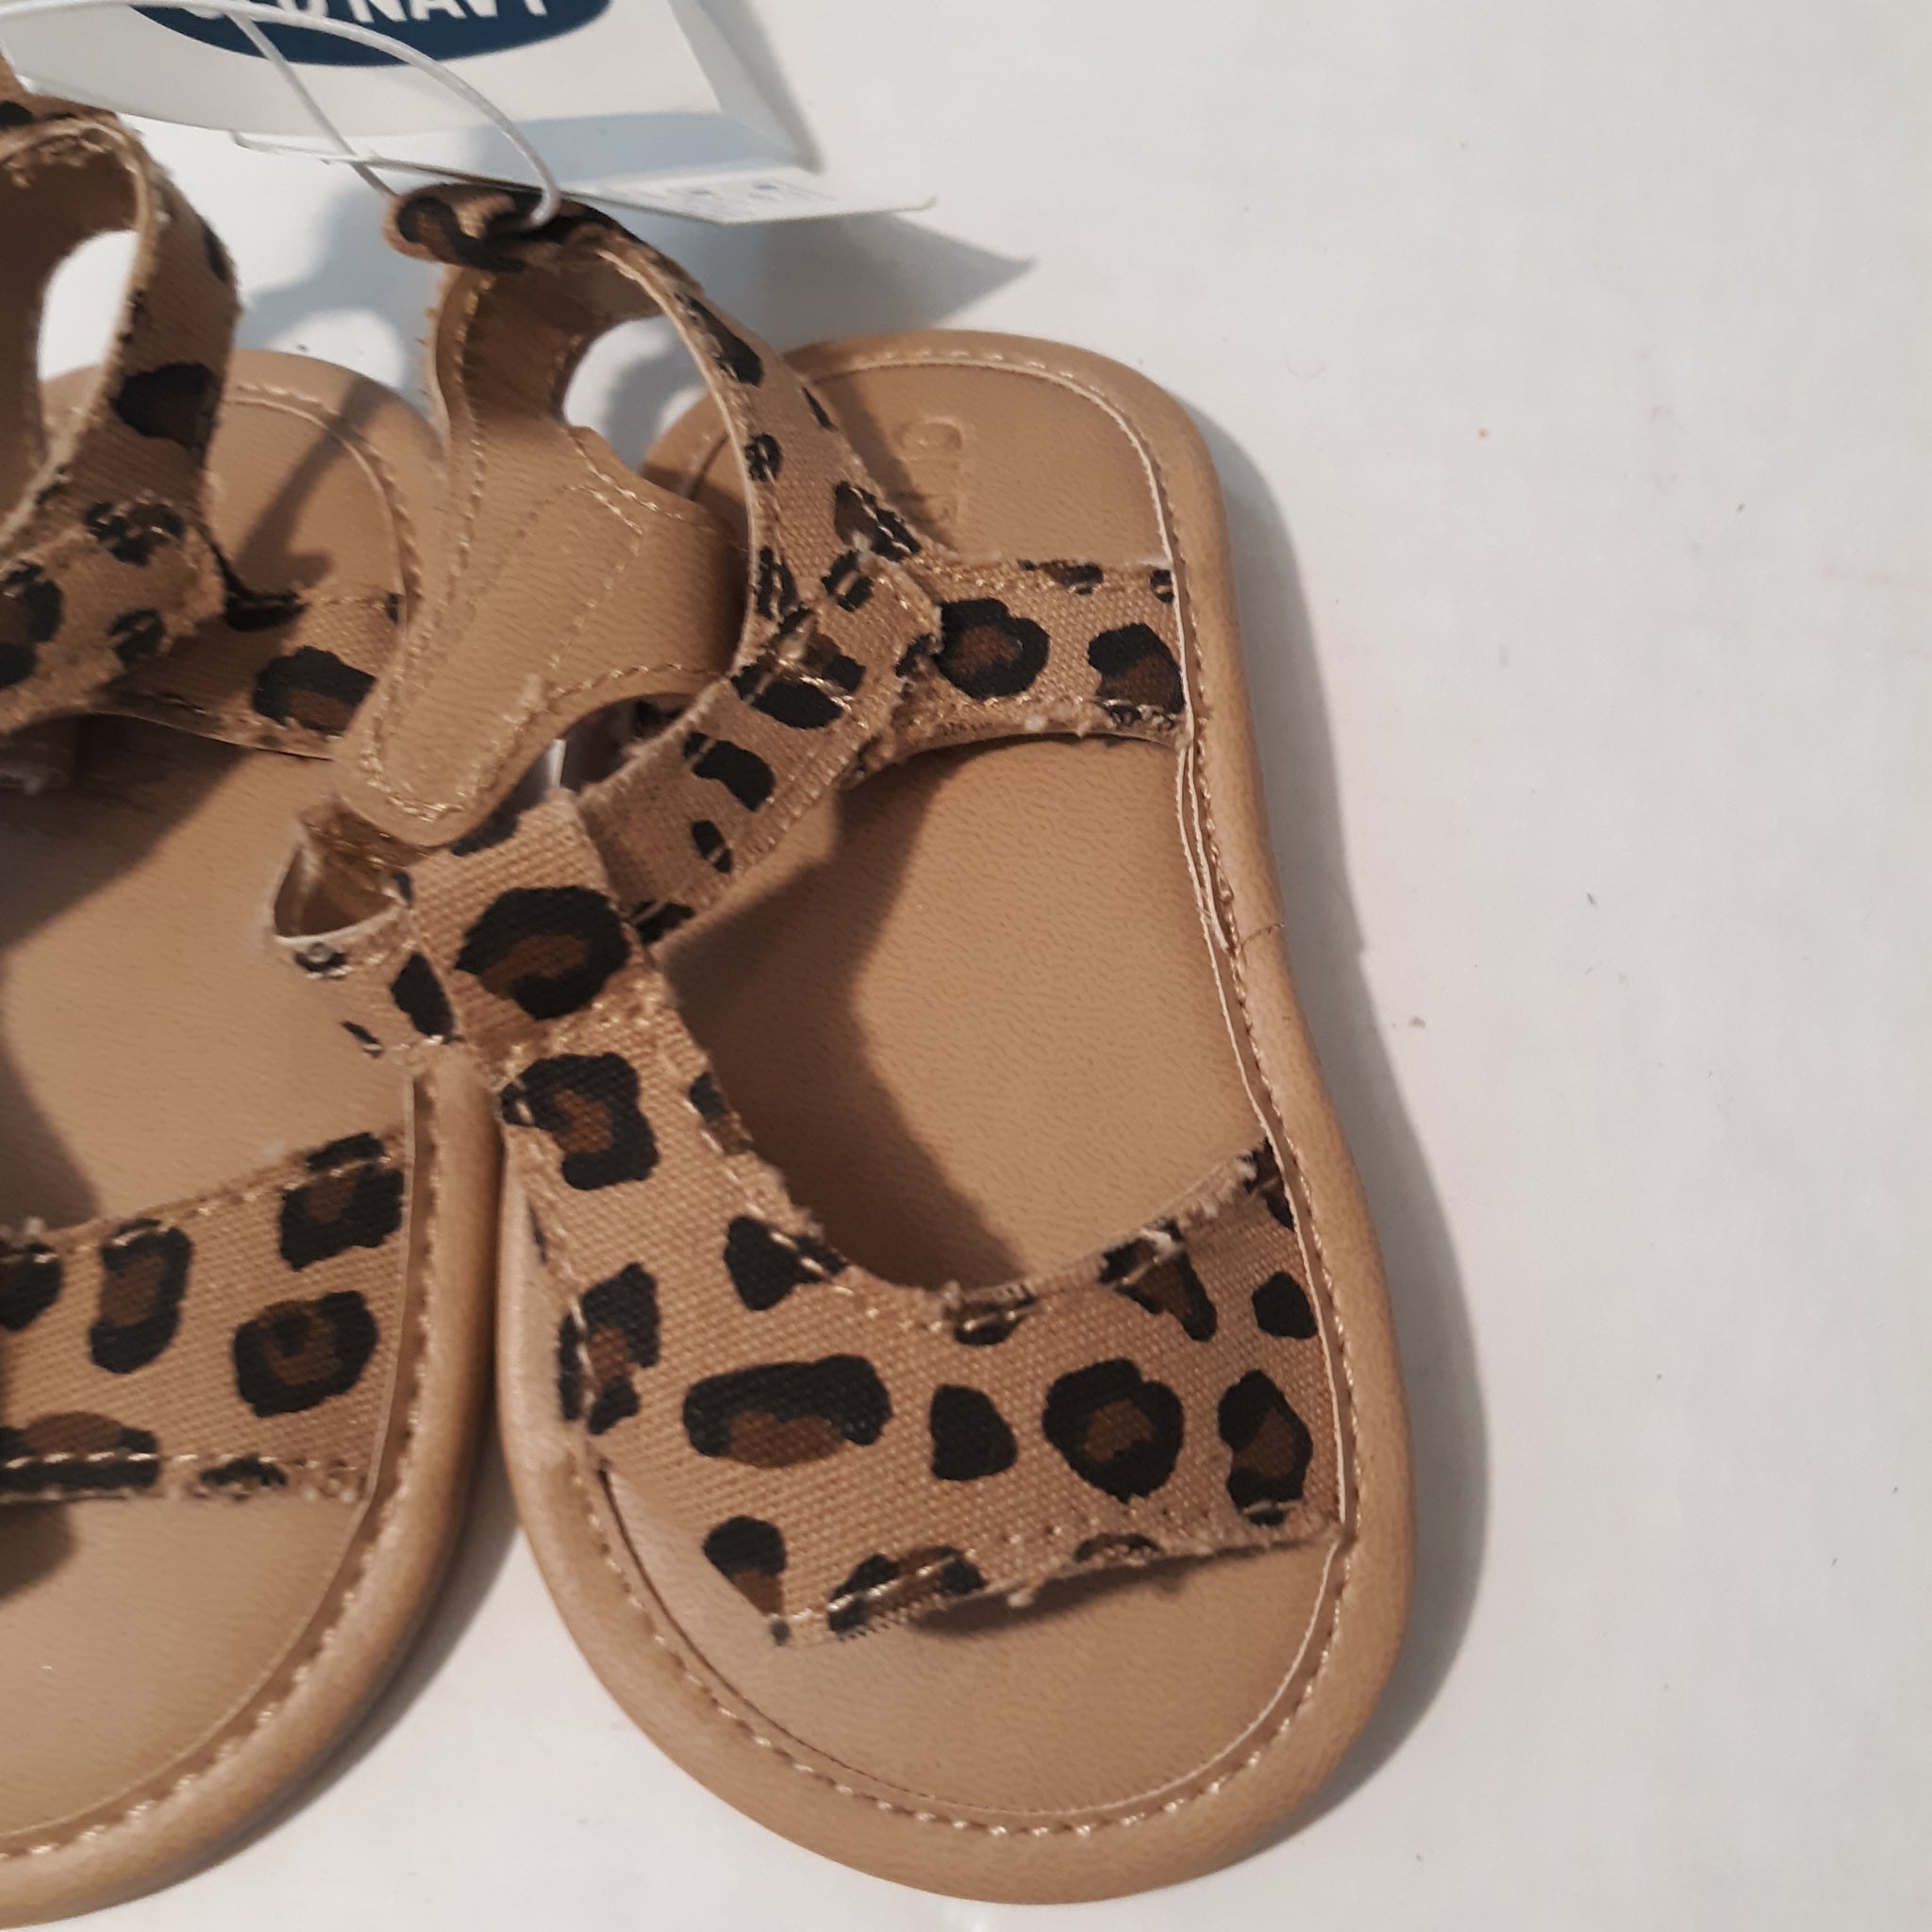 old navy crib shoes